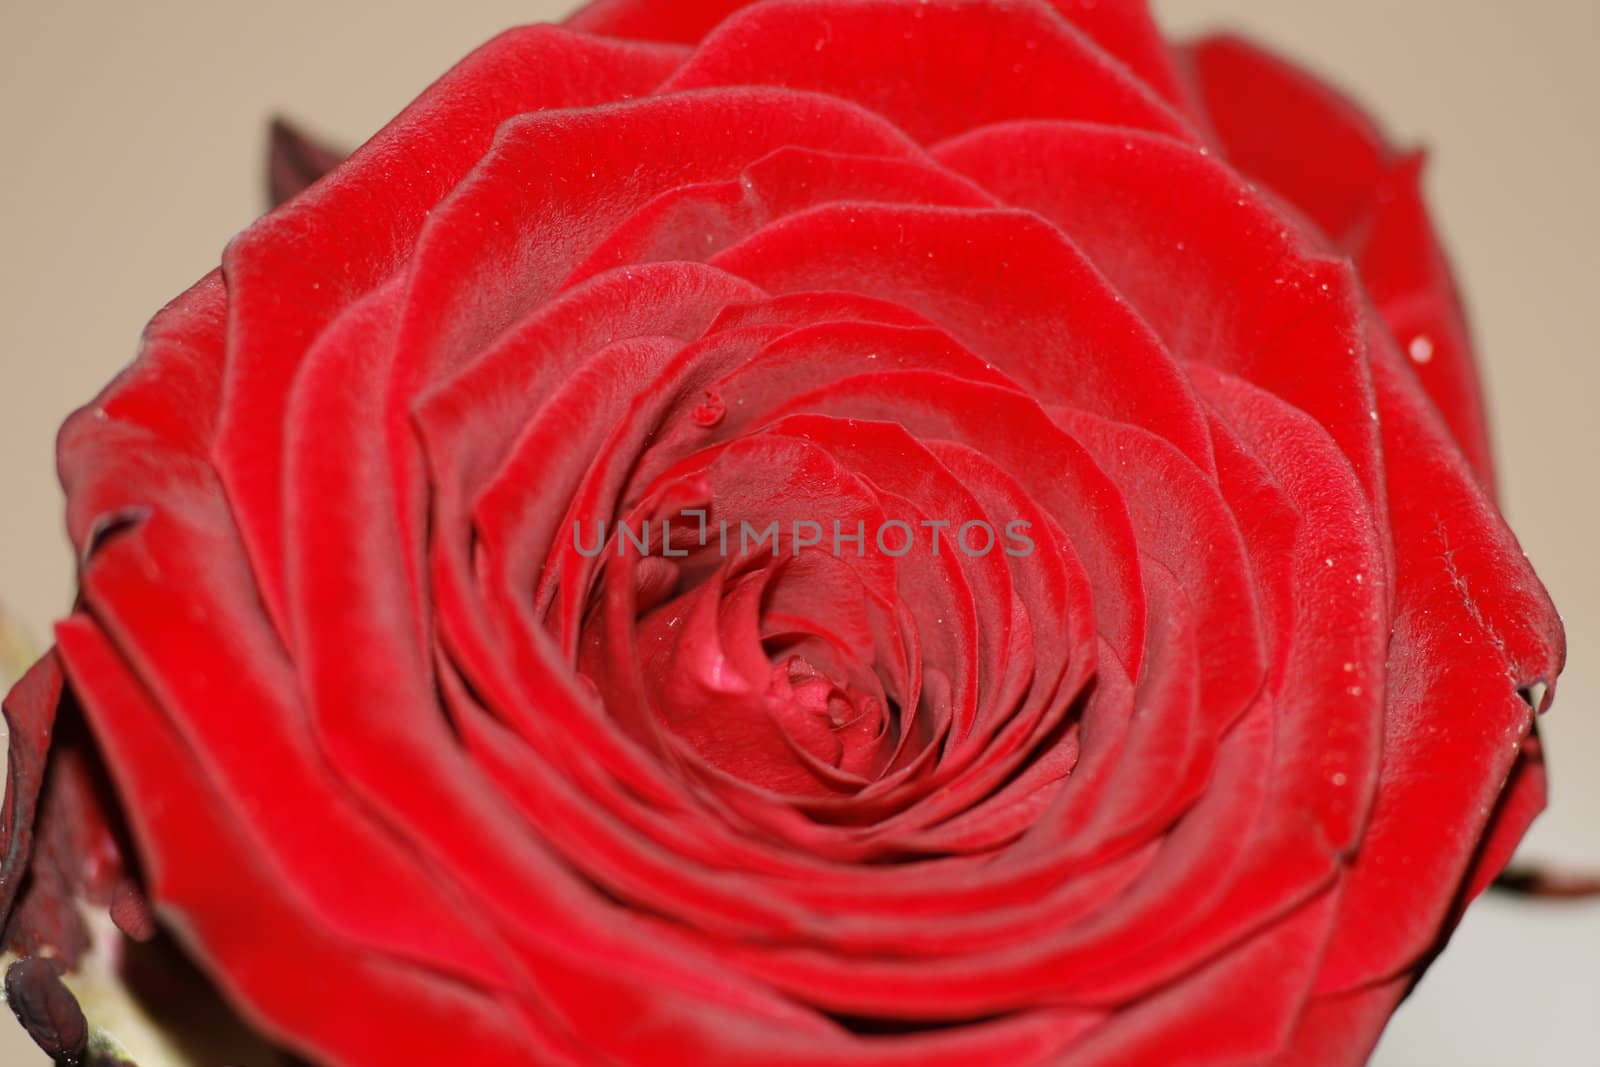 rose close-up by koep